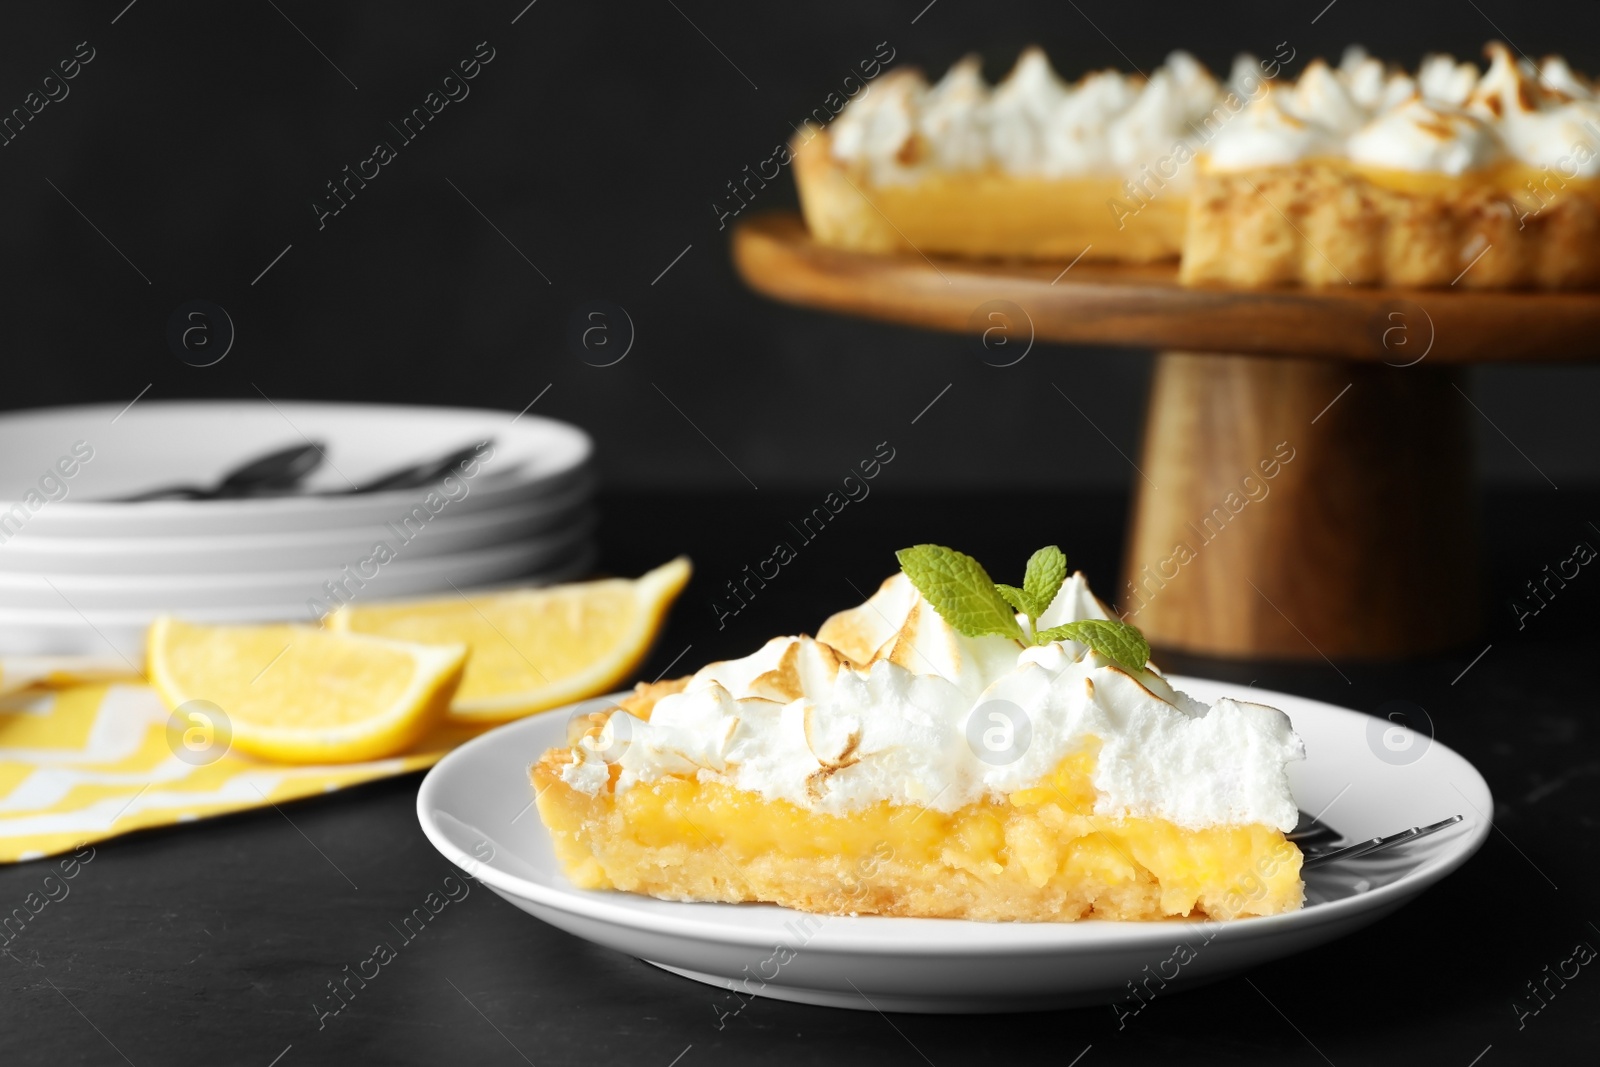 Photo of Plate with piece of delicious lemon meringue pie on black table